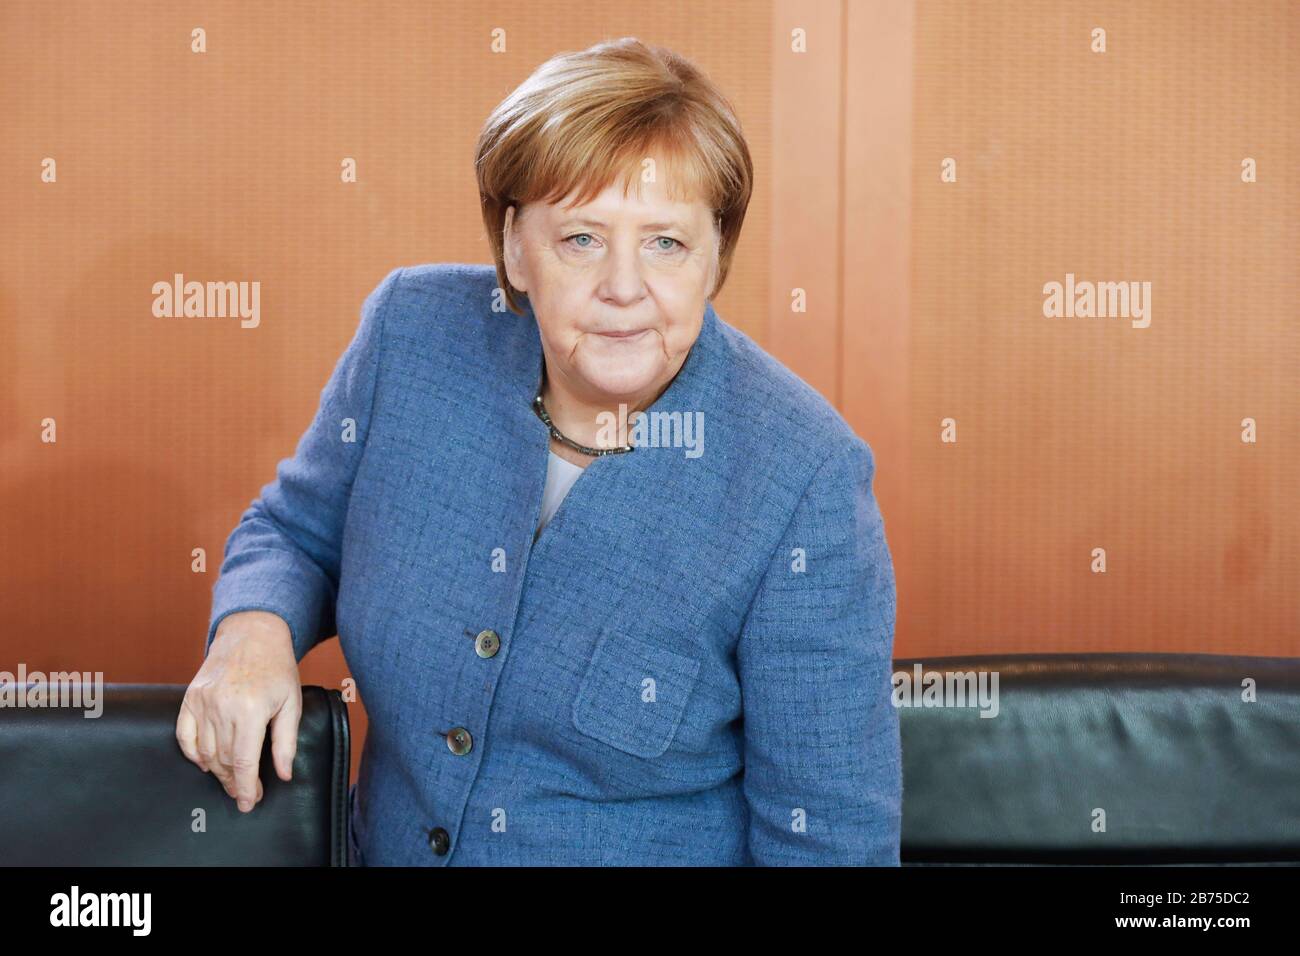 German Chancellor Angela Merkel takes her seat at the cabinet table with a serious expression before the start of a cabinet meeting. Merkel is resigning as CDU party leader, and she does not want to extend her chancellorship either. [automated translation] Stock Photo